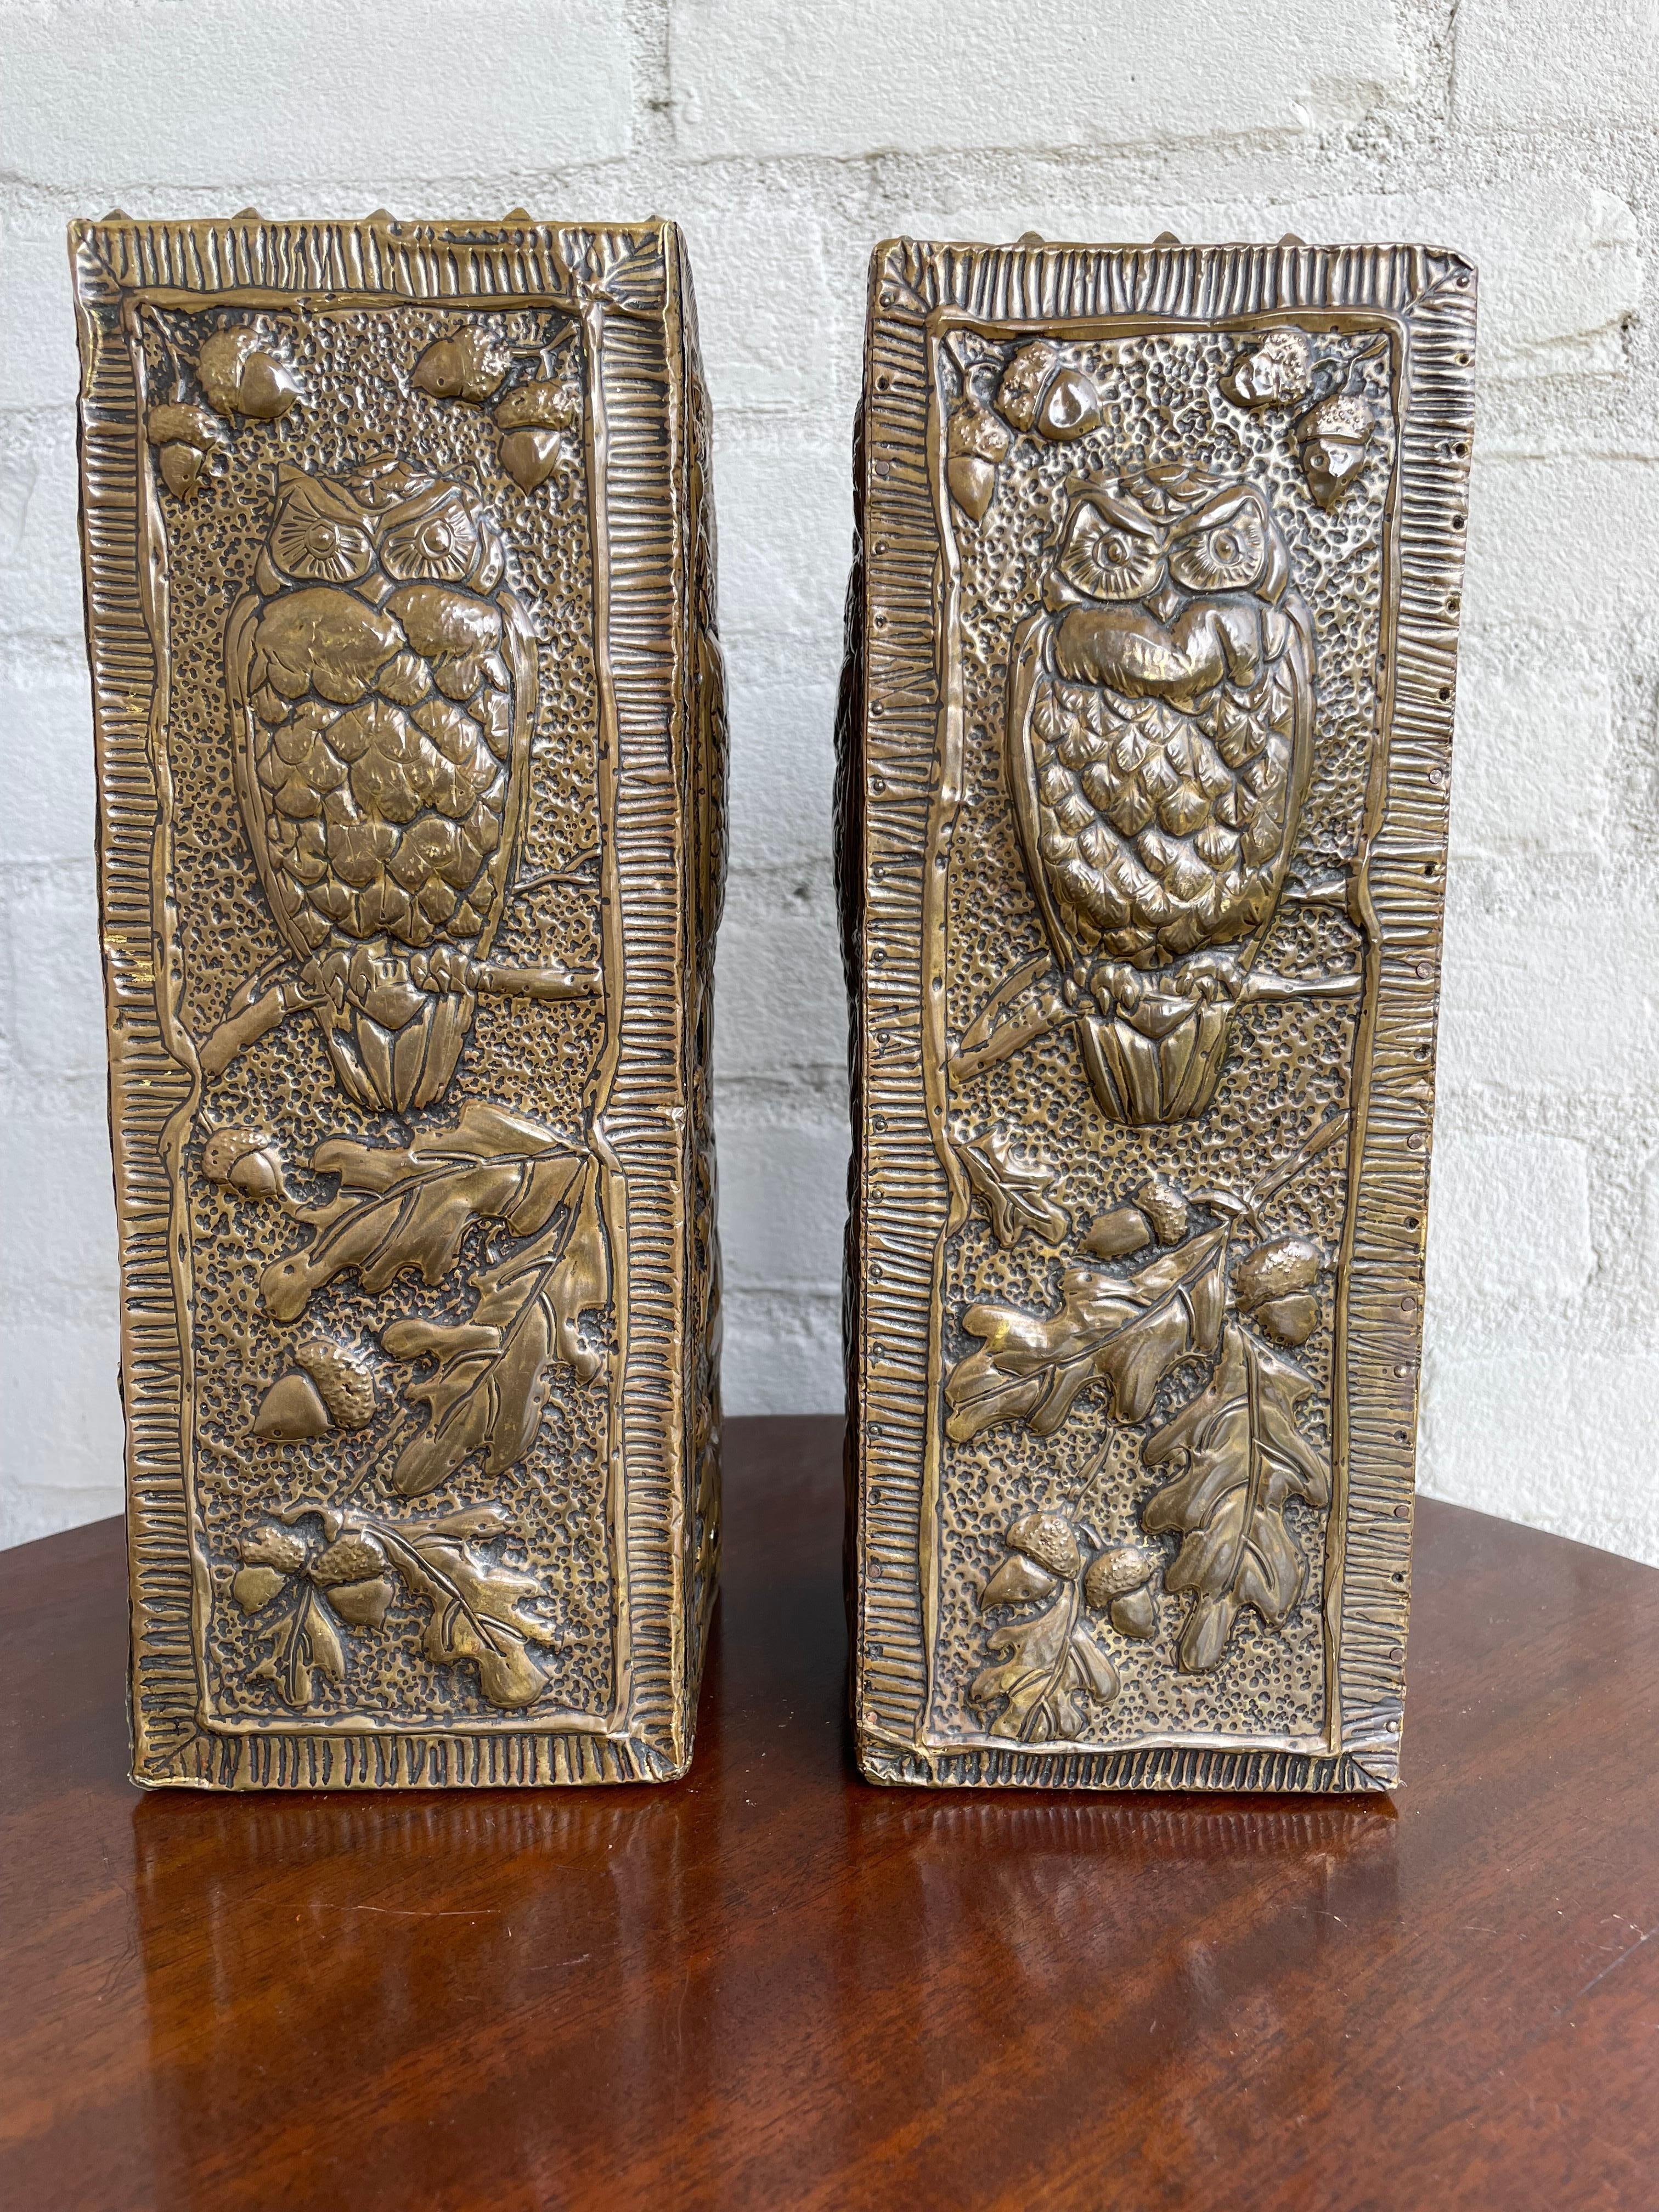 Antique and Unique Arts & Crafts Pair of Embossed Brass Vases w. Owl Sculptures For Sale 4